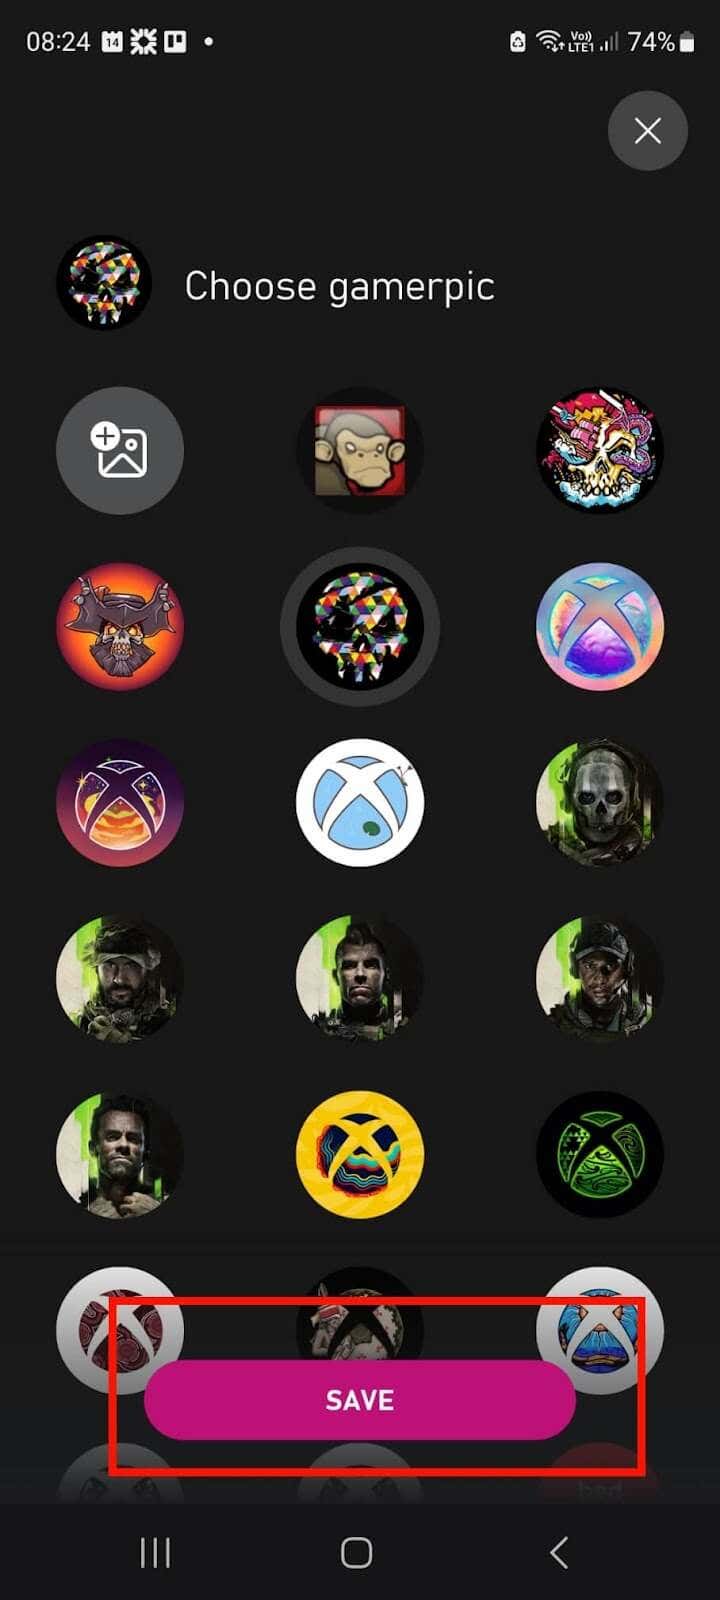 Top Two Ways to Change Your Xbox Gamerpic or Profile Picture